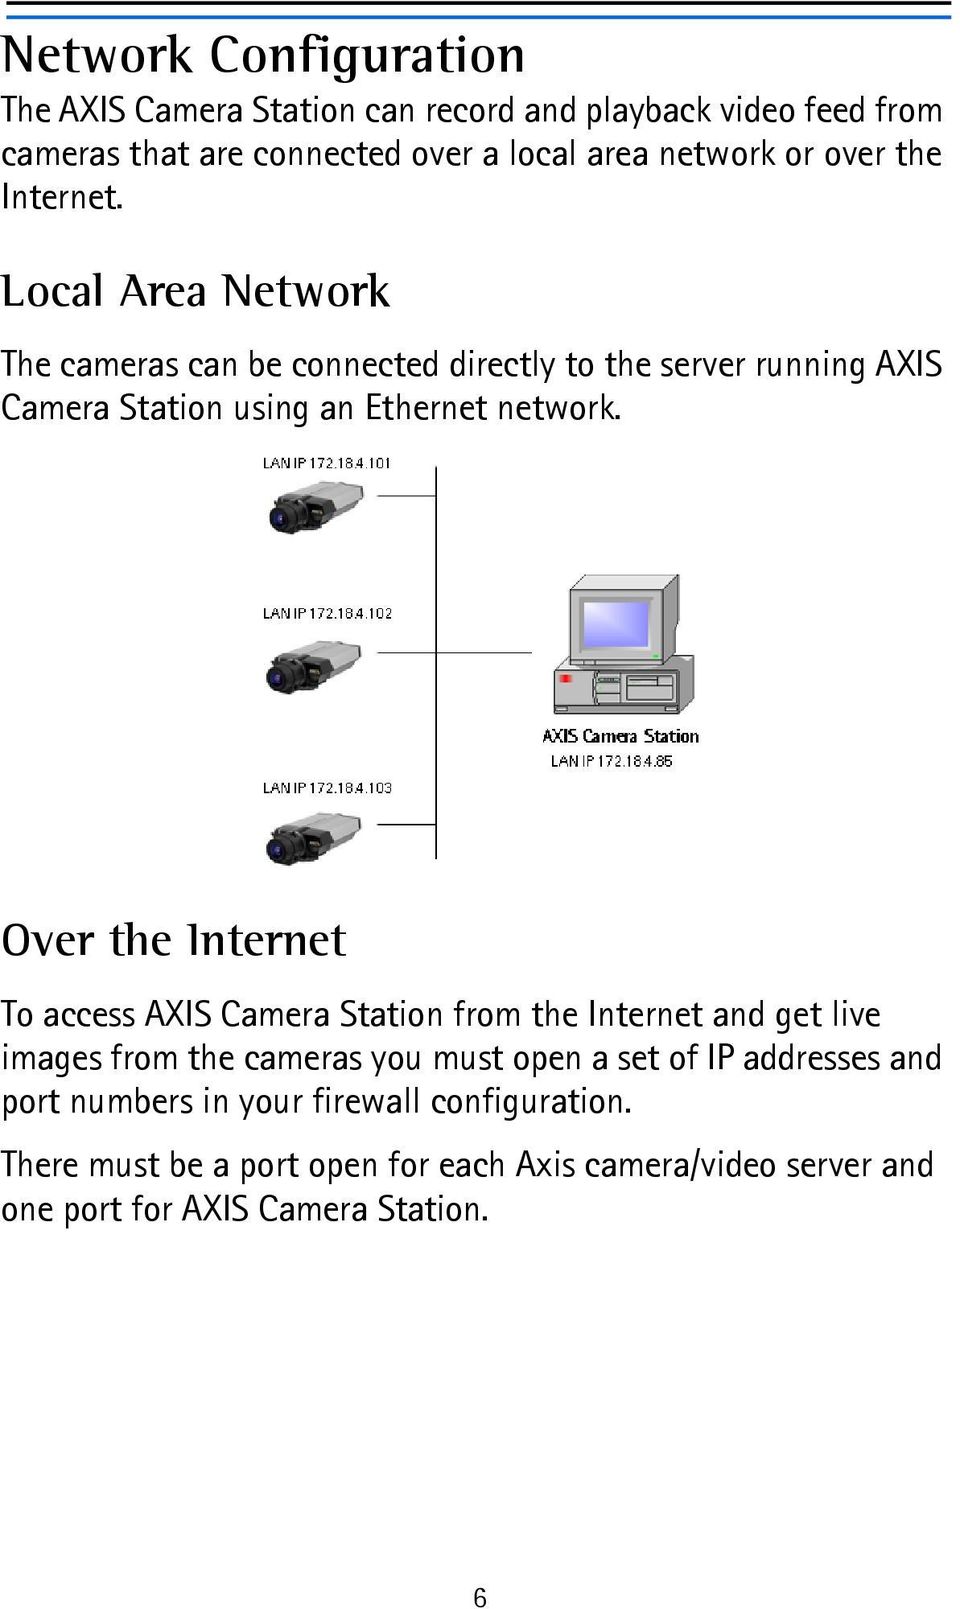 Over the Internet To access AXIS Camera Station from the Internet and get live images from the cameras you must open a set of IP addresses and